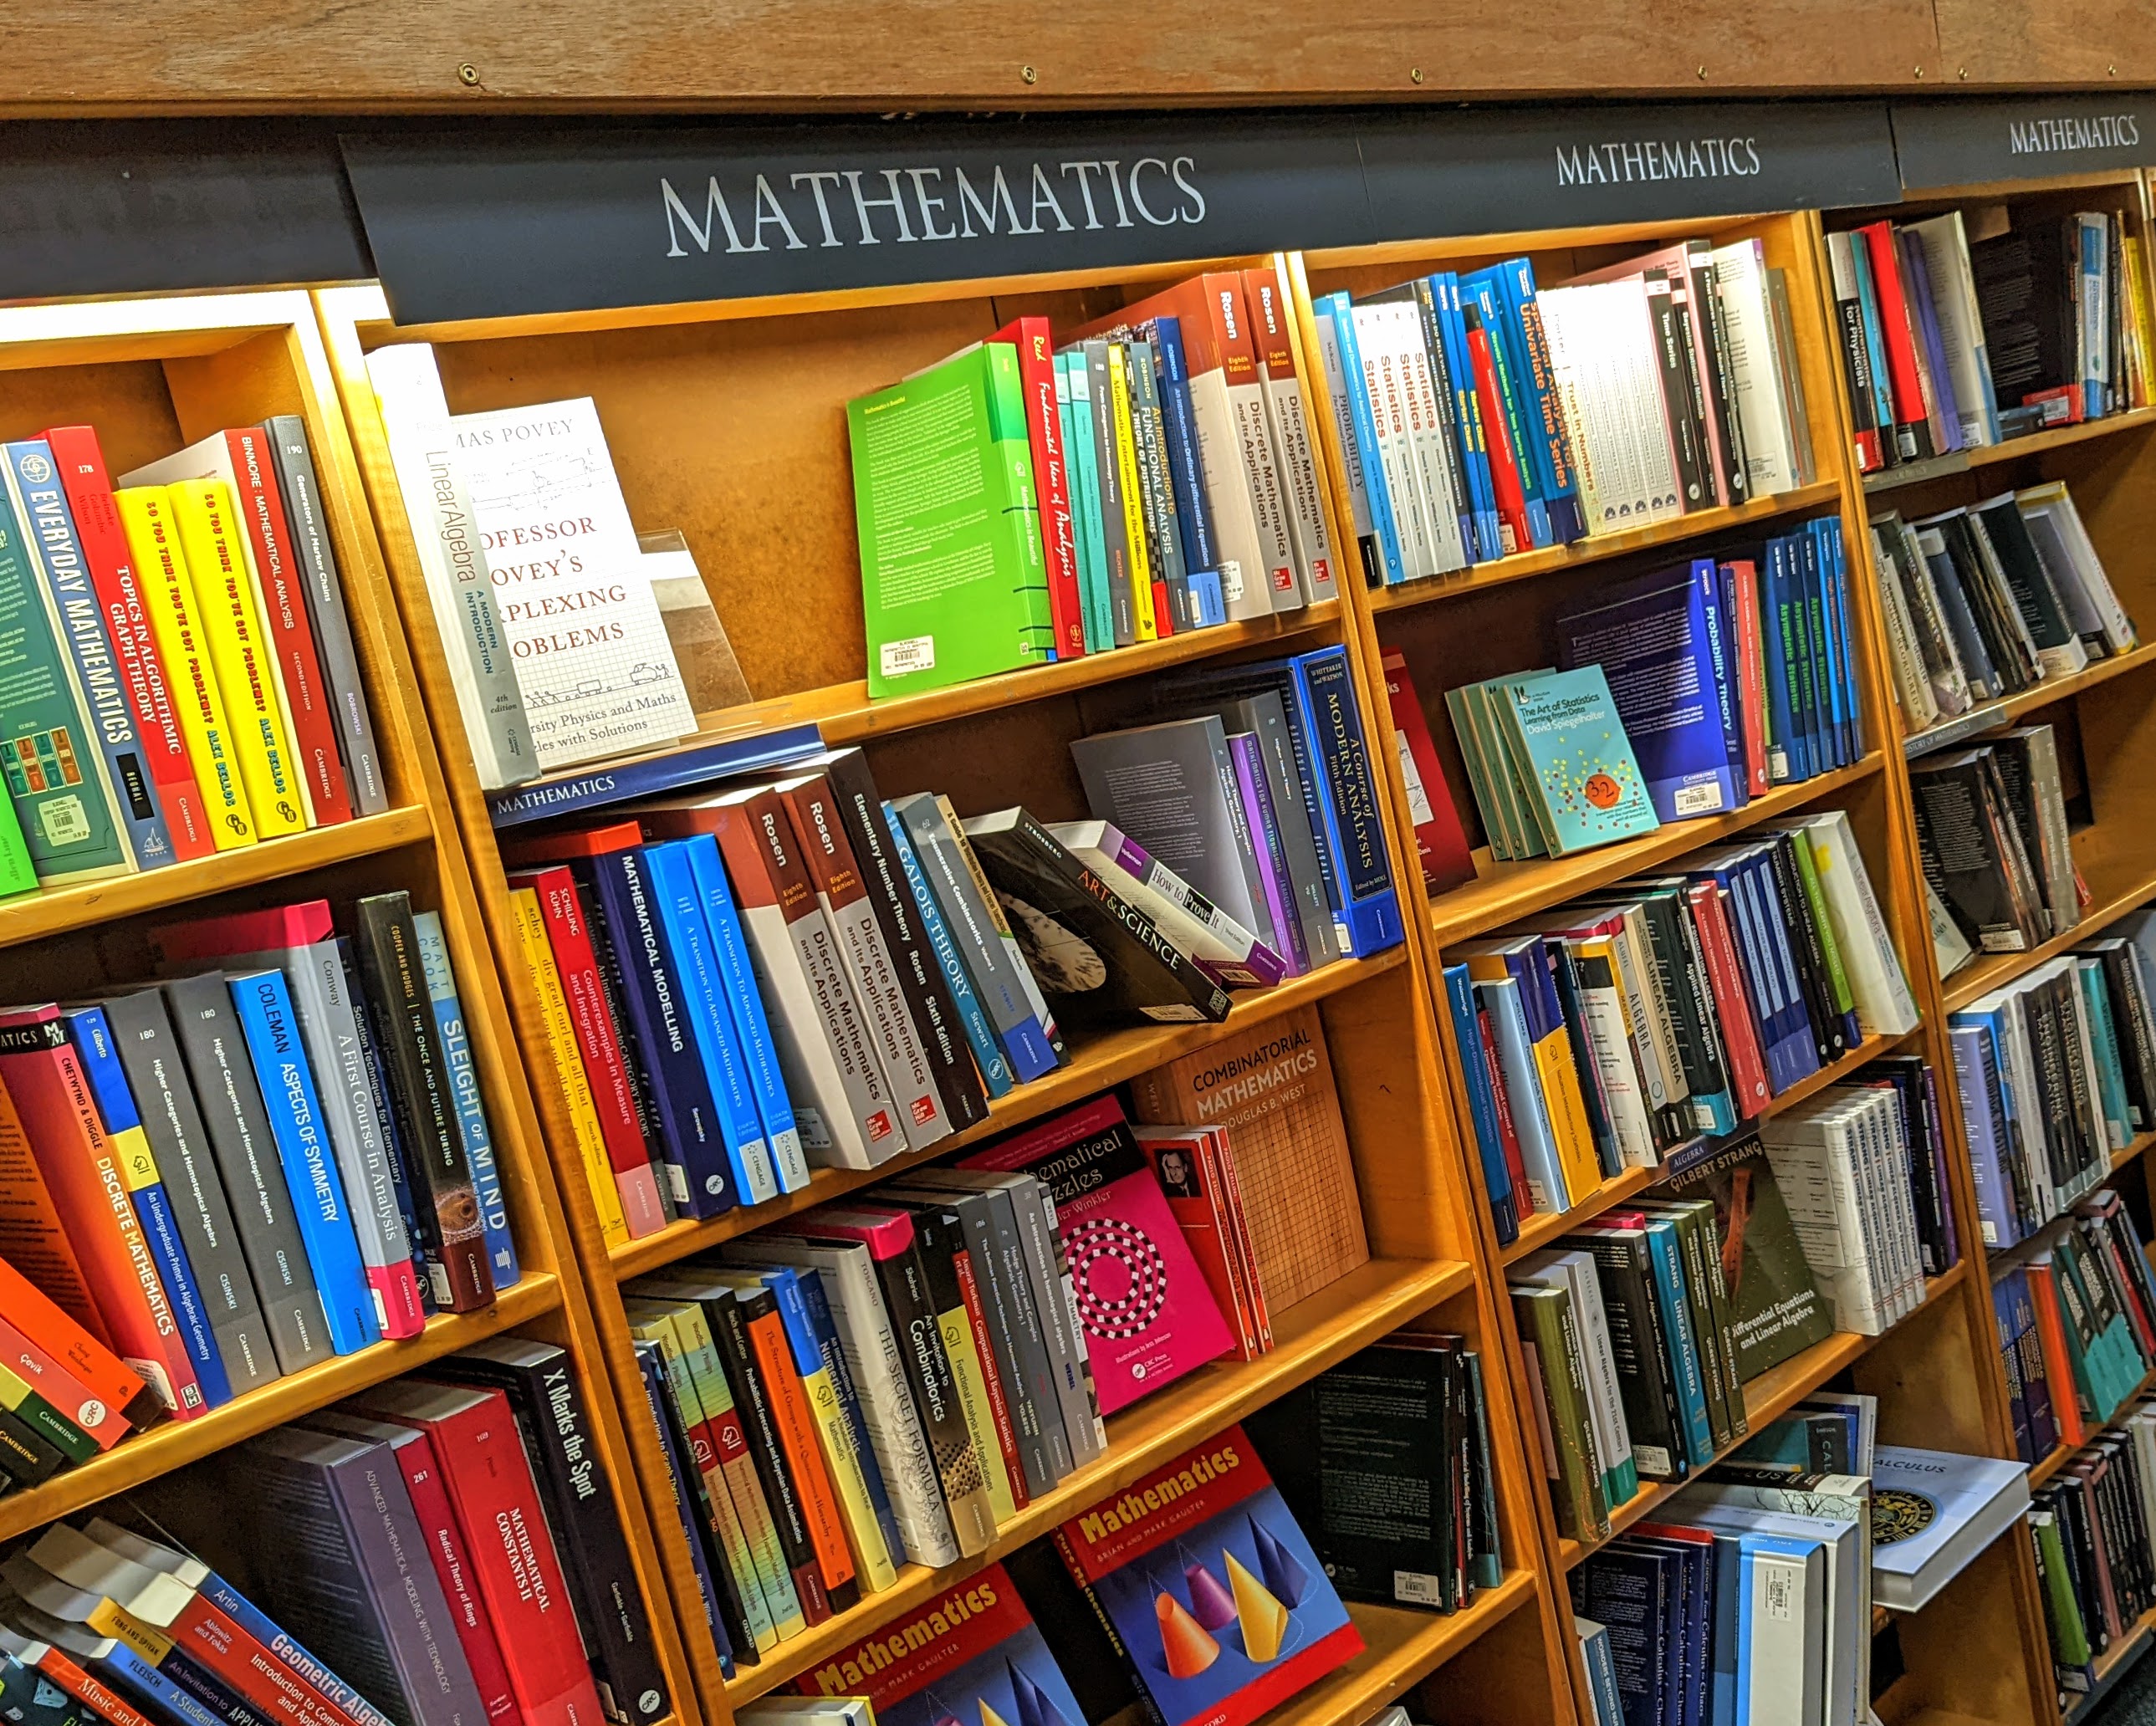 Photograph of the mathematics section of Blackwell's book shop in Oxford.